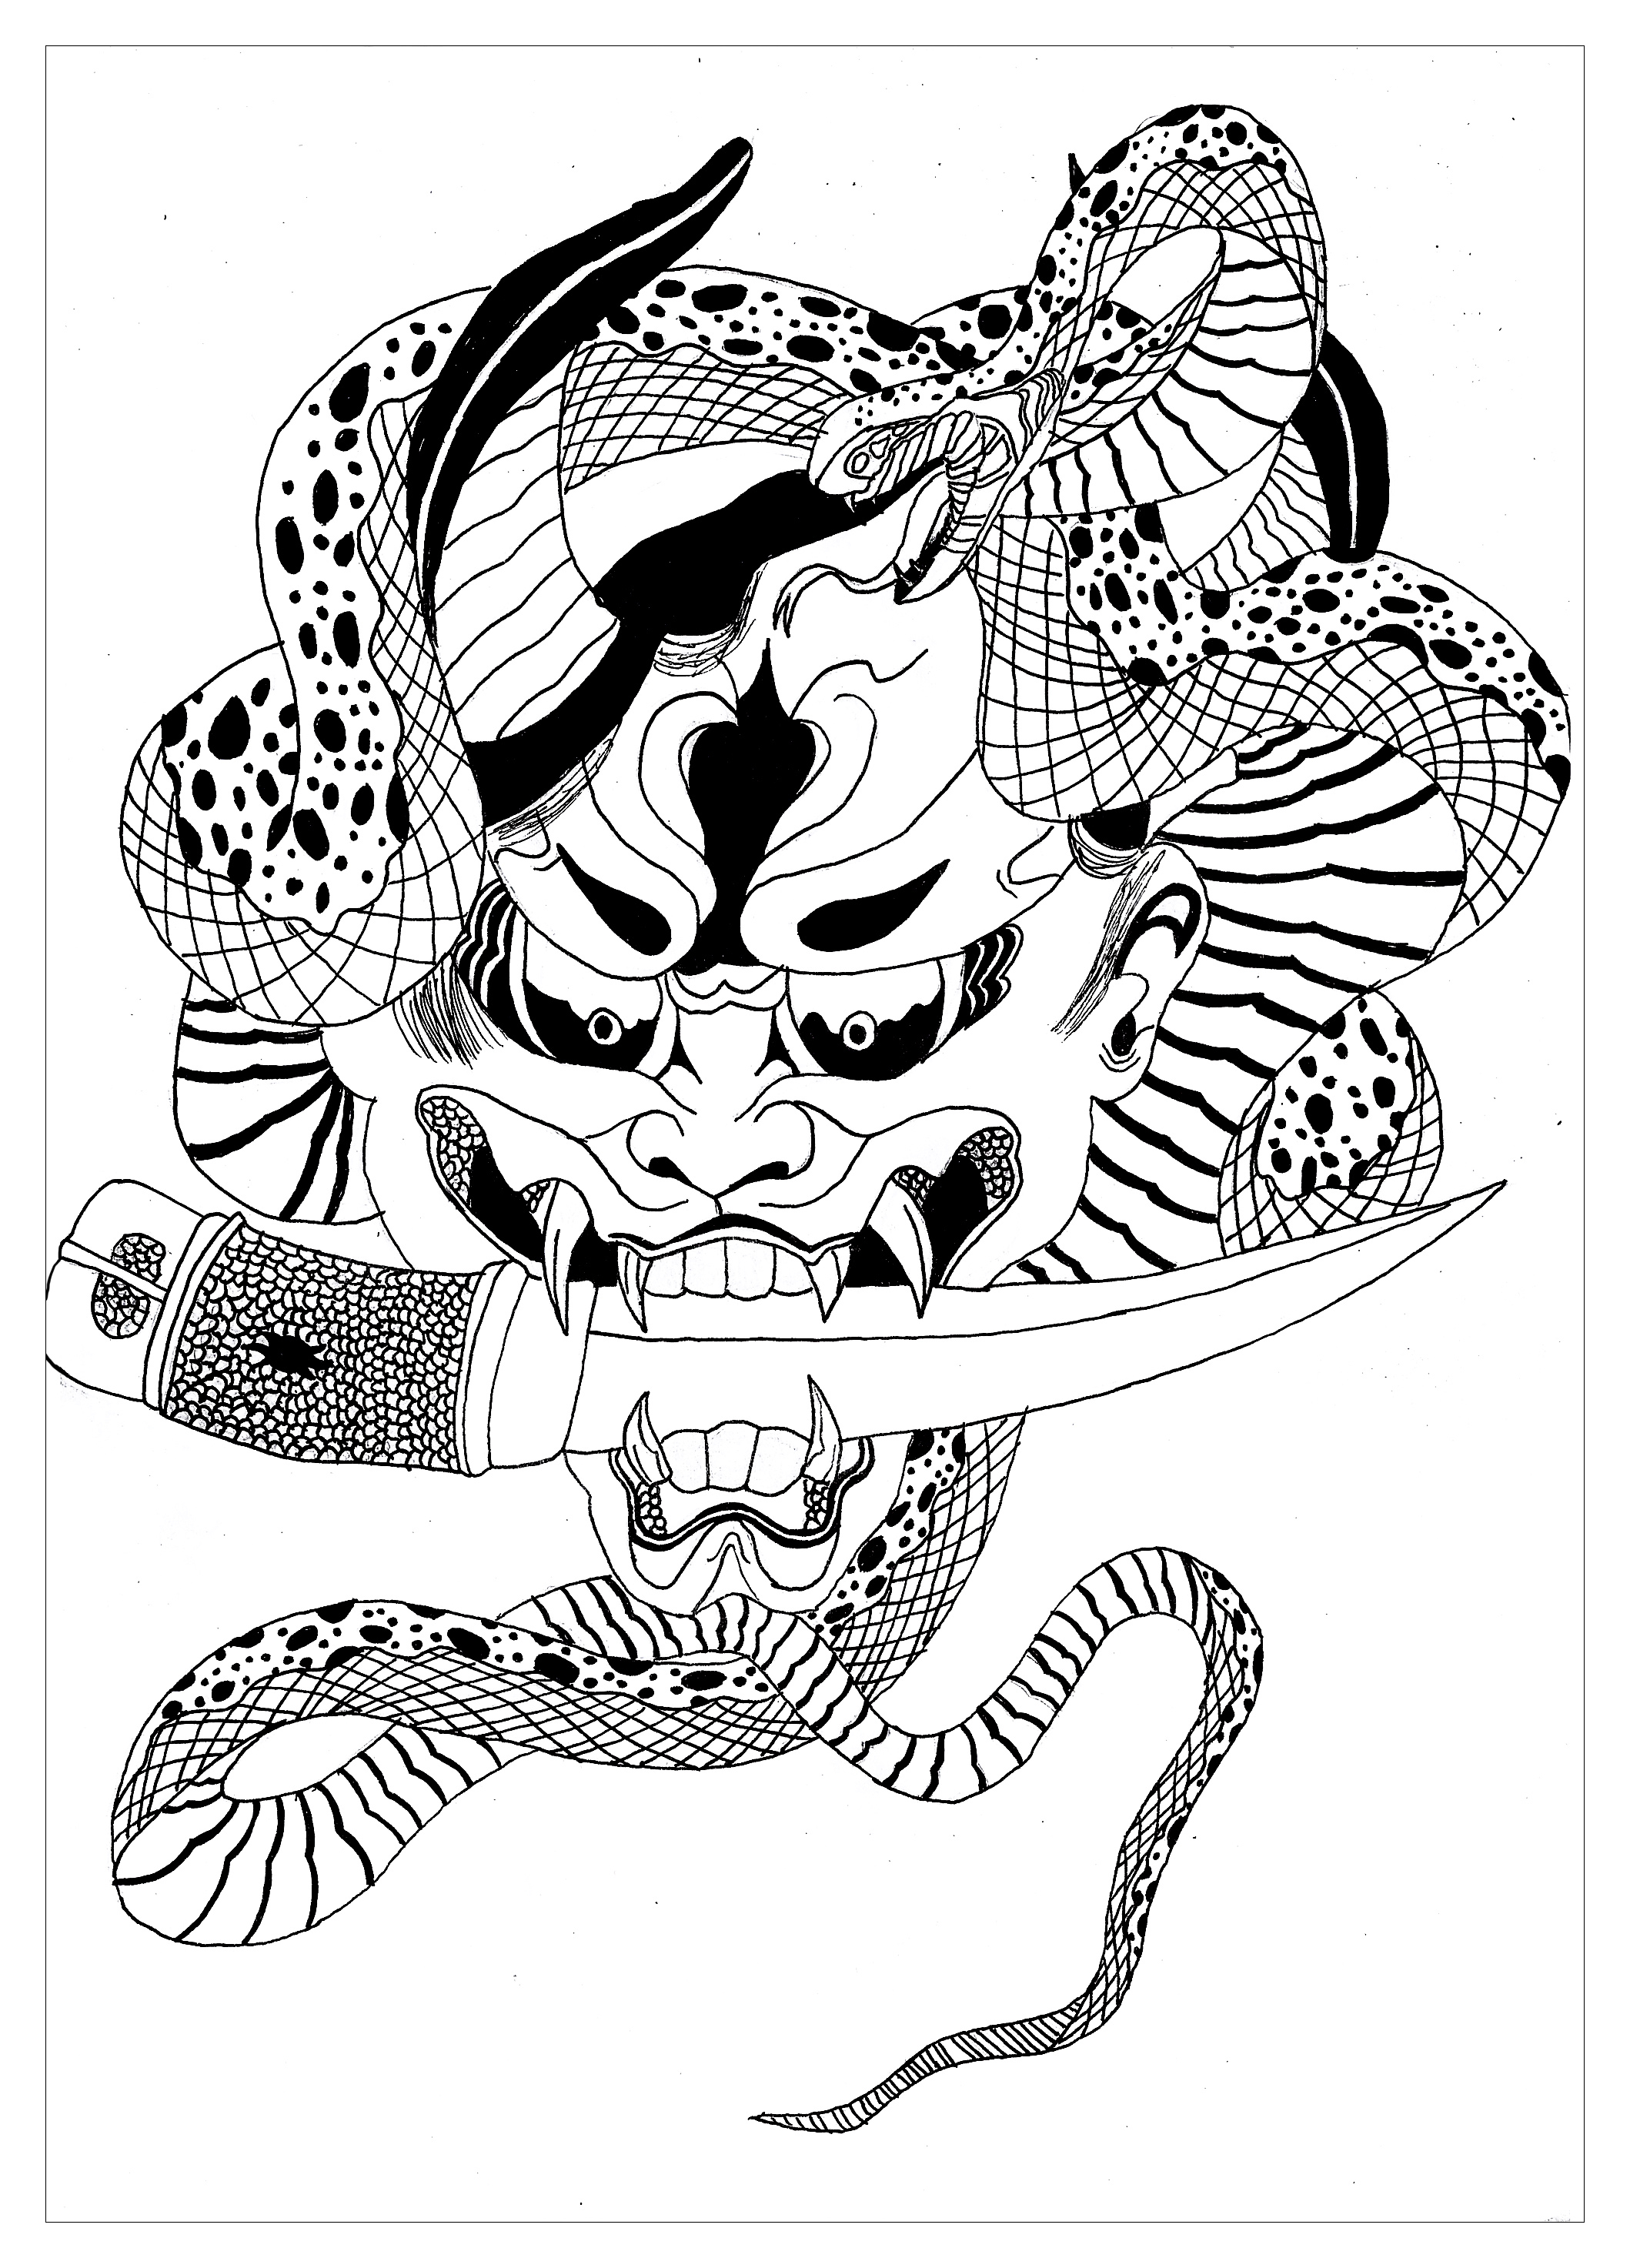 Coloring page of a Japanese Hannya mask, Artist : Krissy